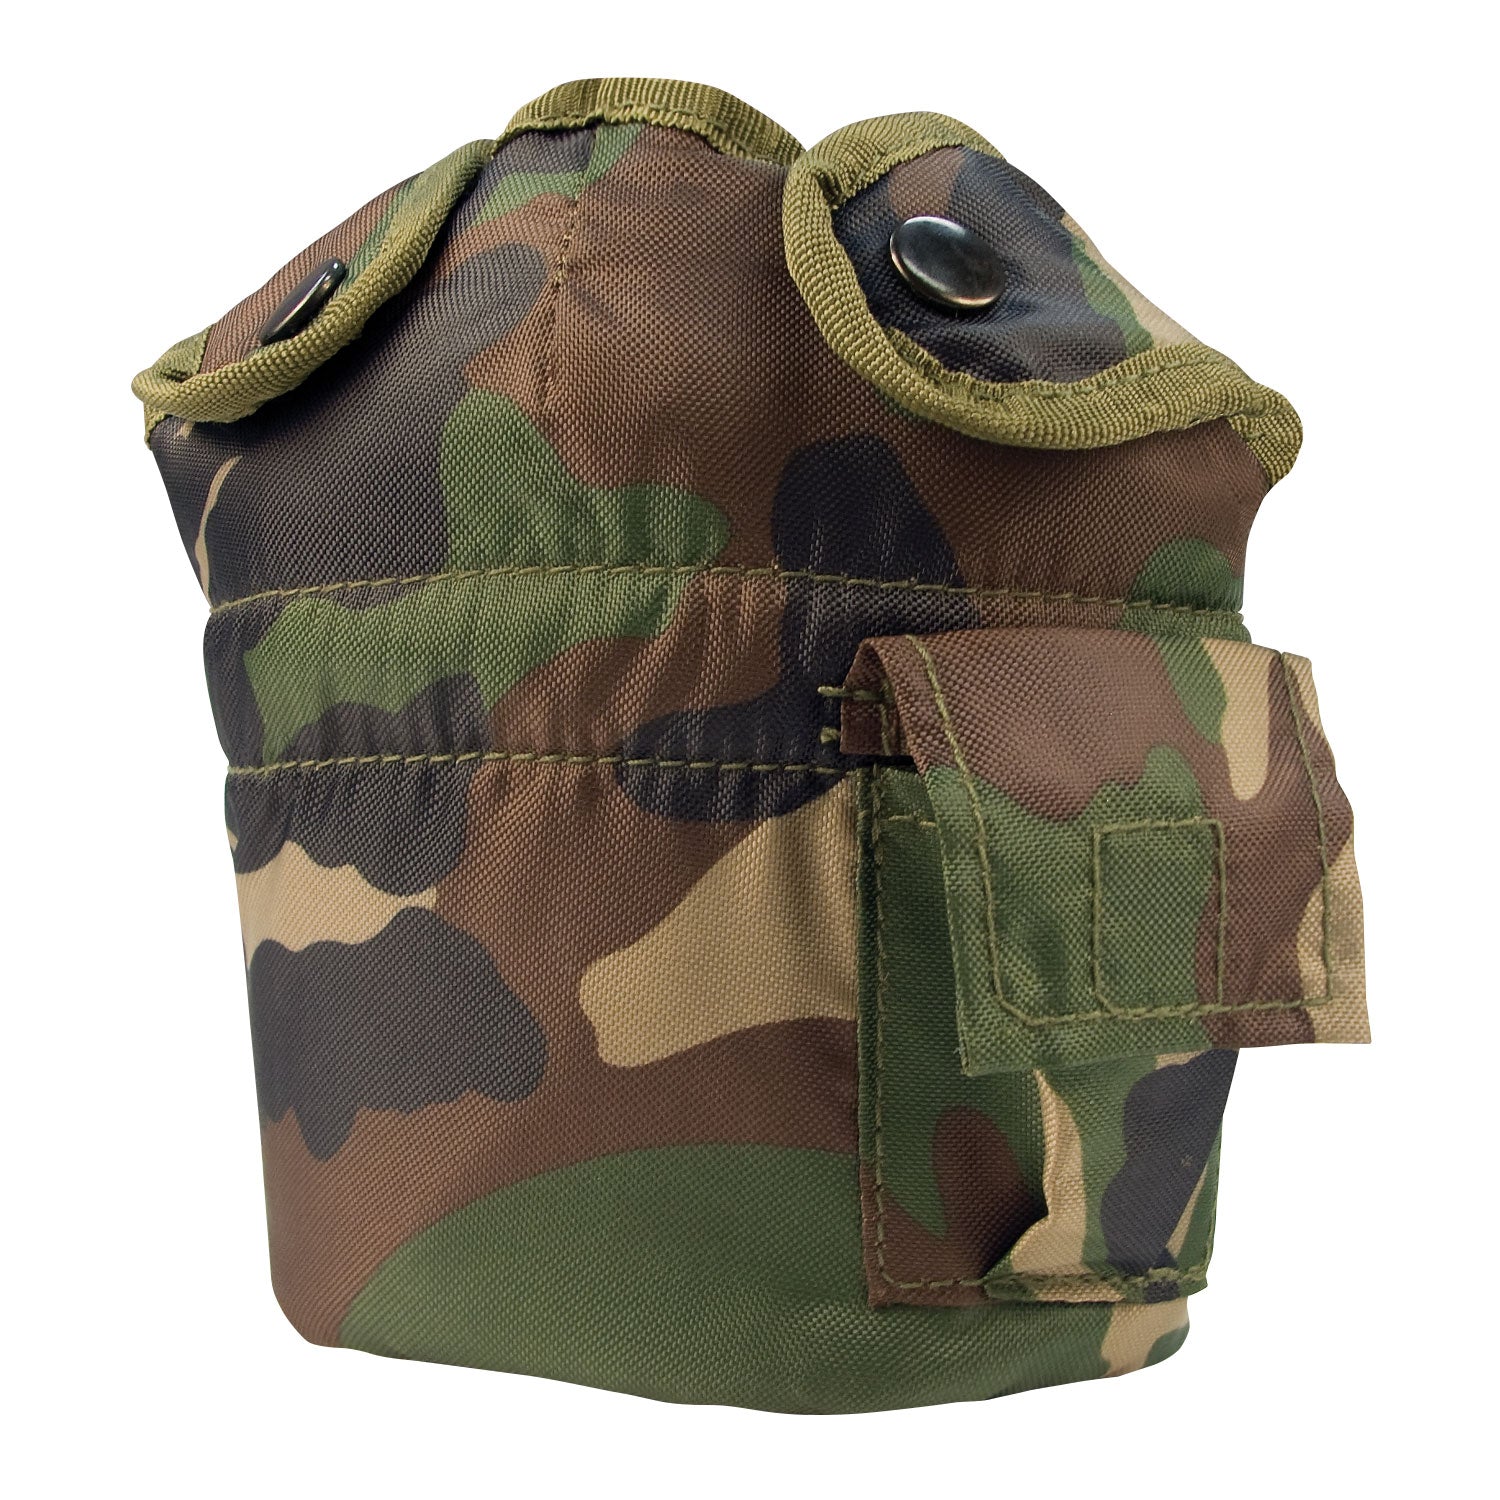 Milspec G.I. Style Canteen Cover Hydration and Water Purification MilTac Tactical Military Outdoor Gear Australia